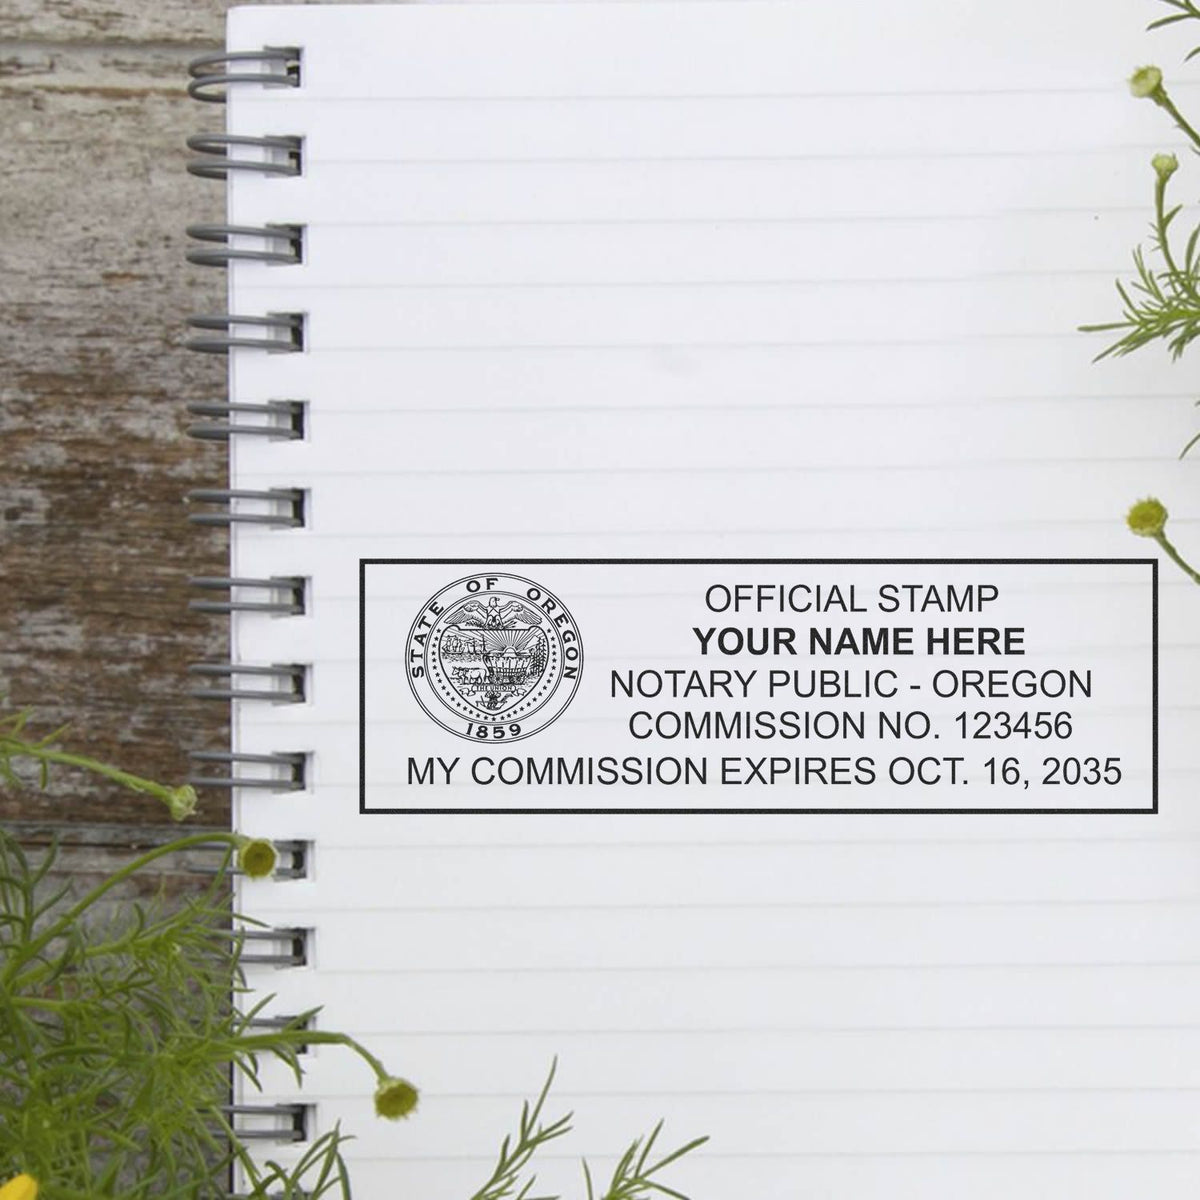 A lifestyle photo showing a stamped image of the Heavy-Duty Oregon Rectangular Notary Stamp on a piece of paper